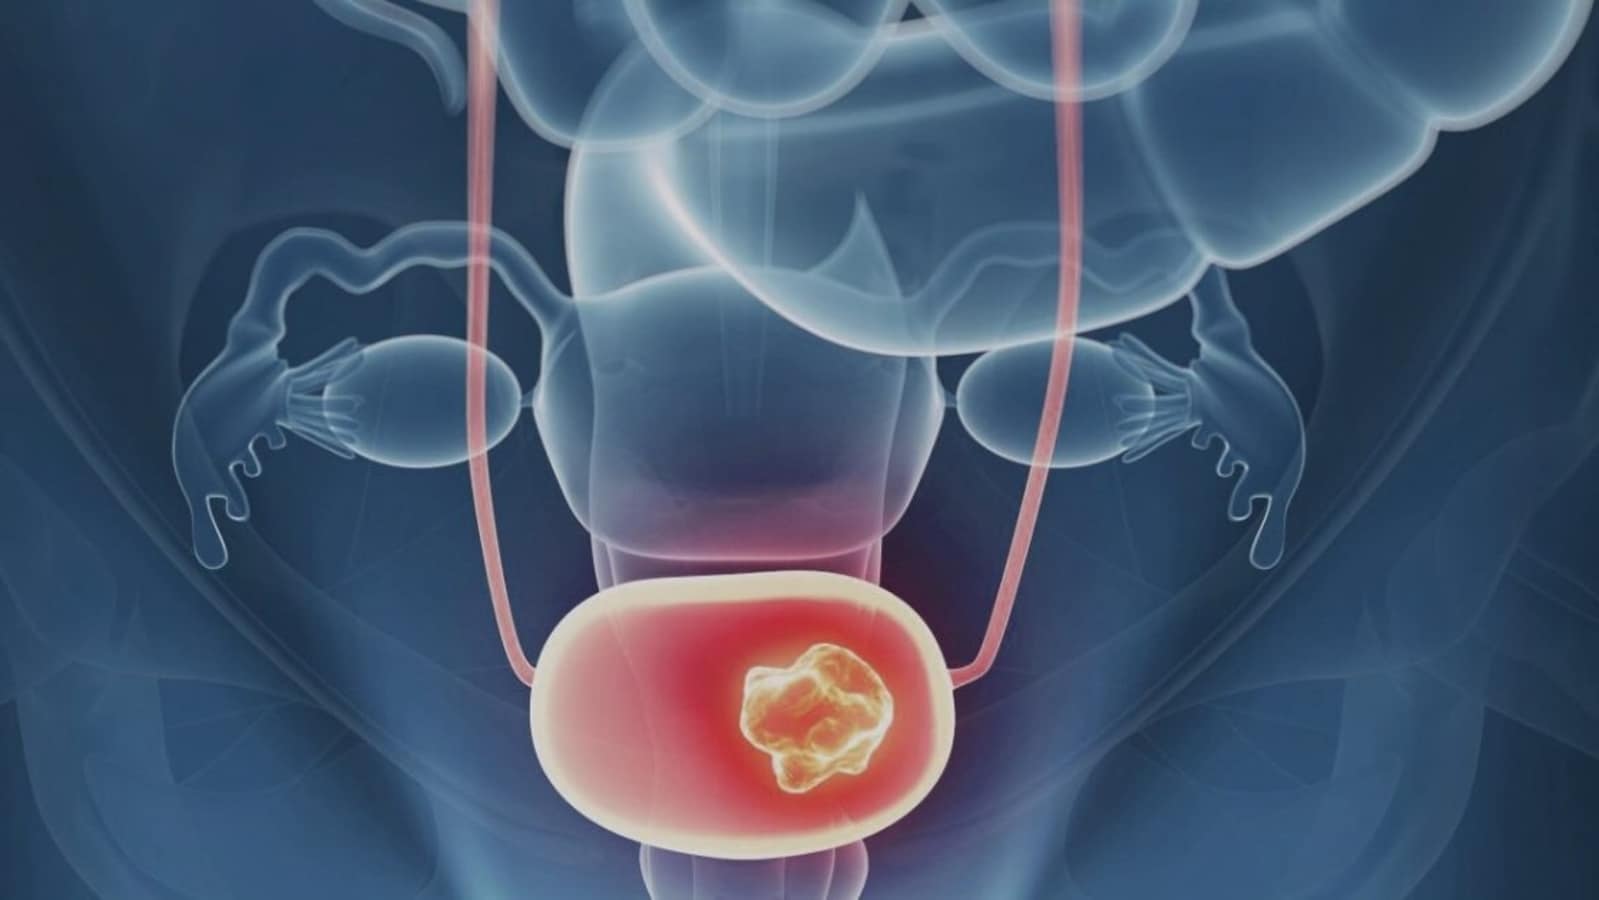 Bladder Cancer Awareness Month 2022: Watch out for these warning signs, symptoms | Health